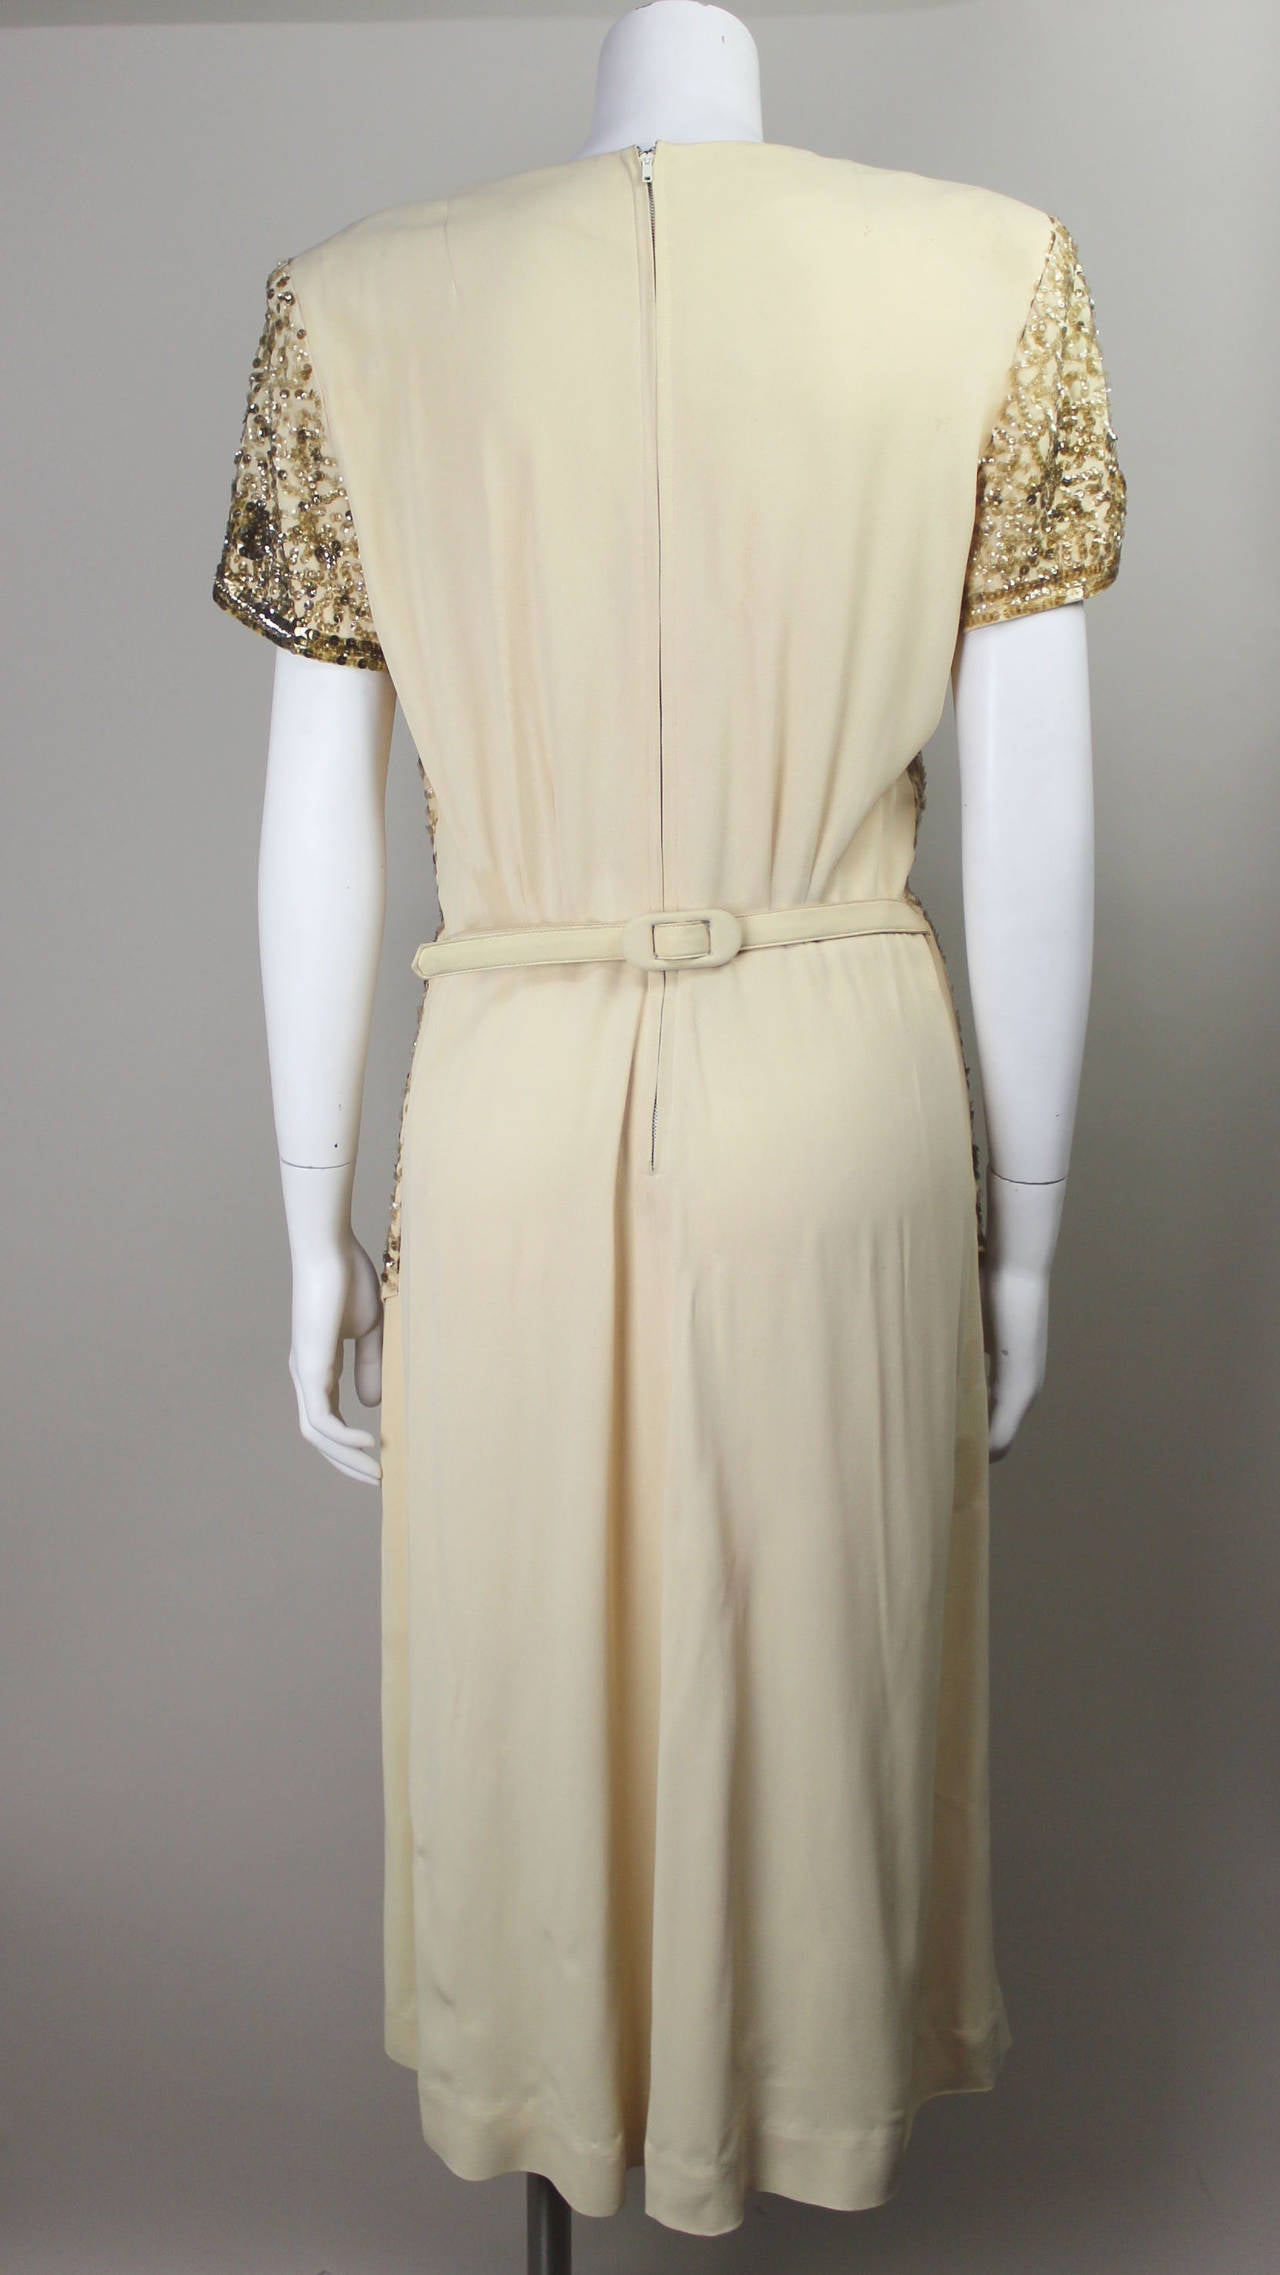 Women's Exquisite 1940s Sequined Cocktail Dress For Sale